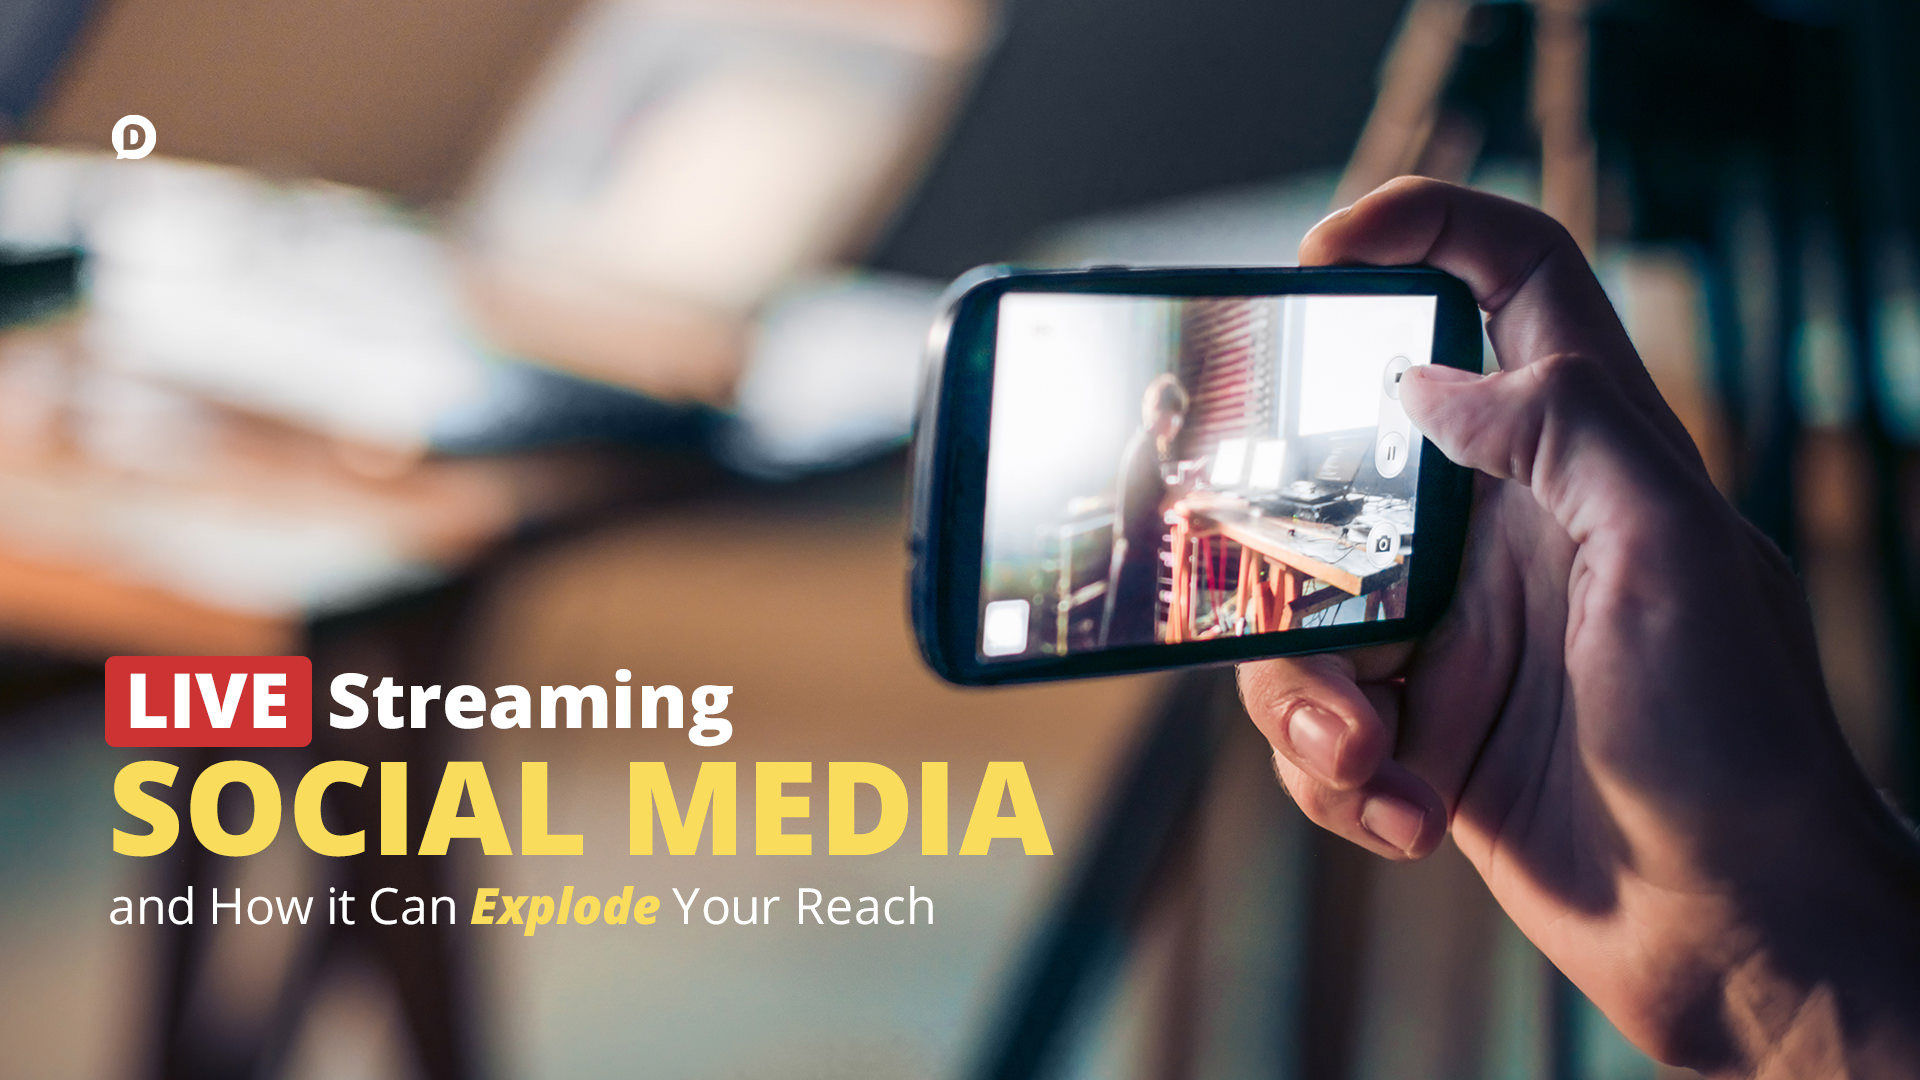 How Live Streaming Social Media Can Explode Your Reach